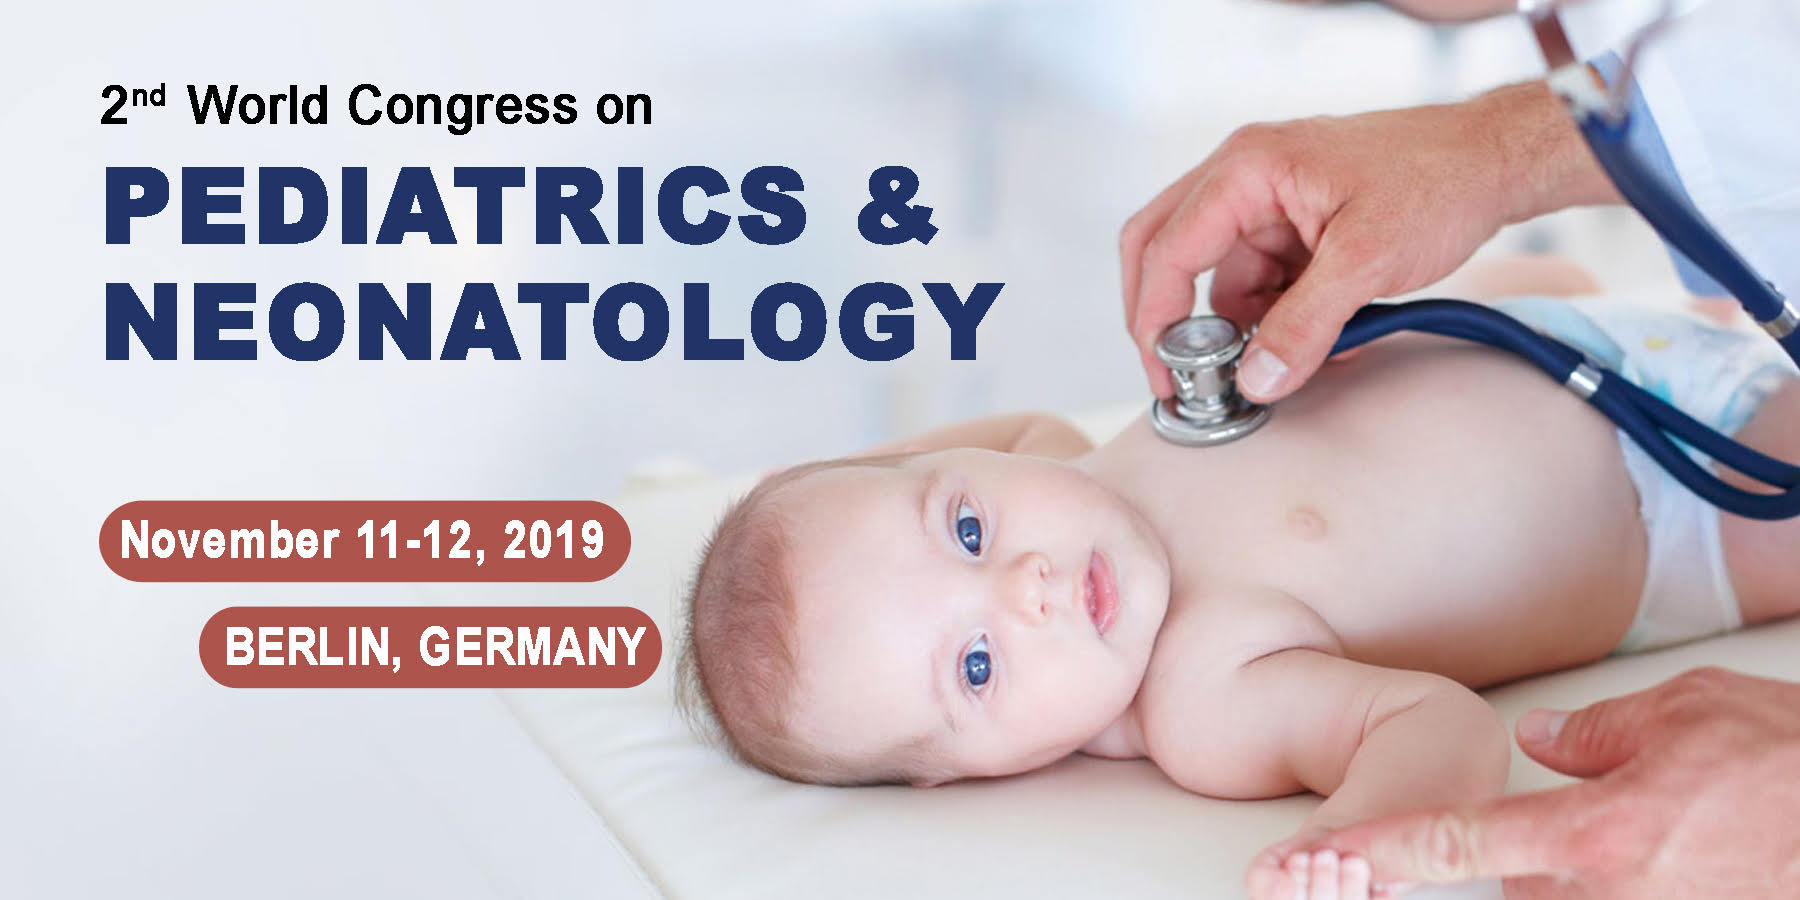 7th World Congress on  Clinical Pediatrics and Neonatal Care, Berlin, Germany